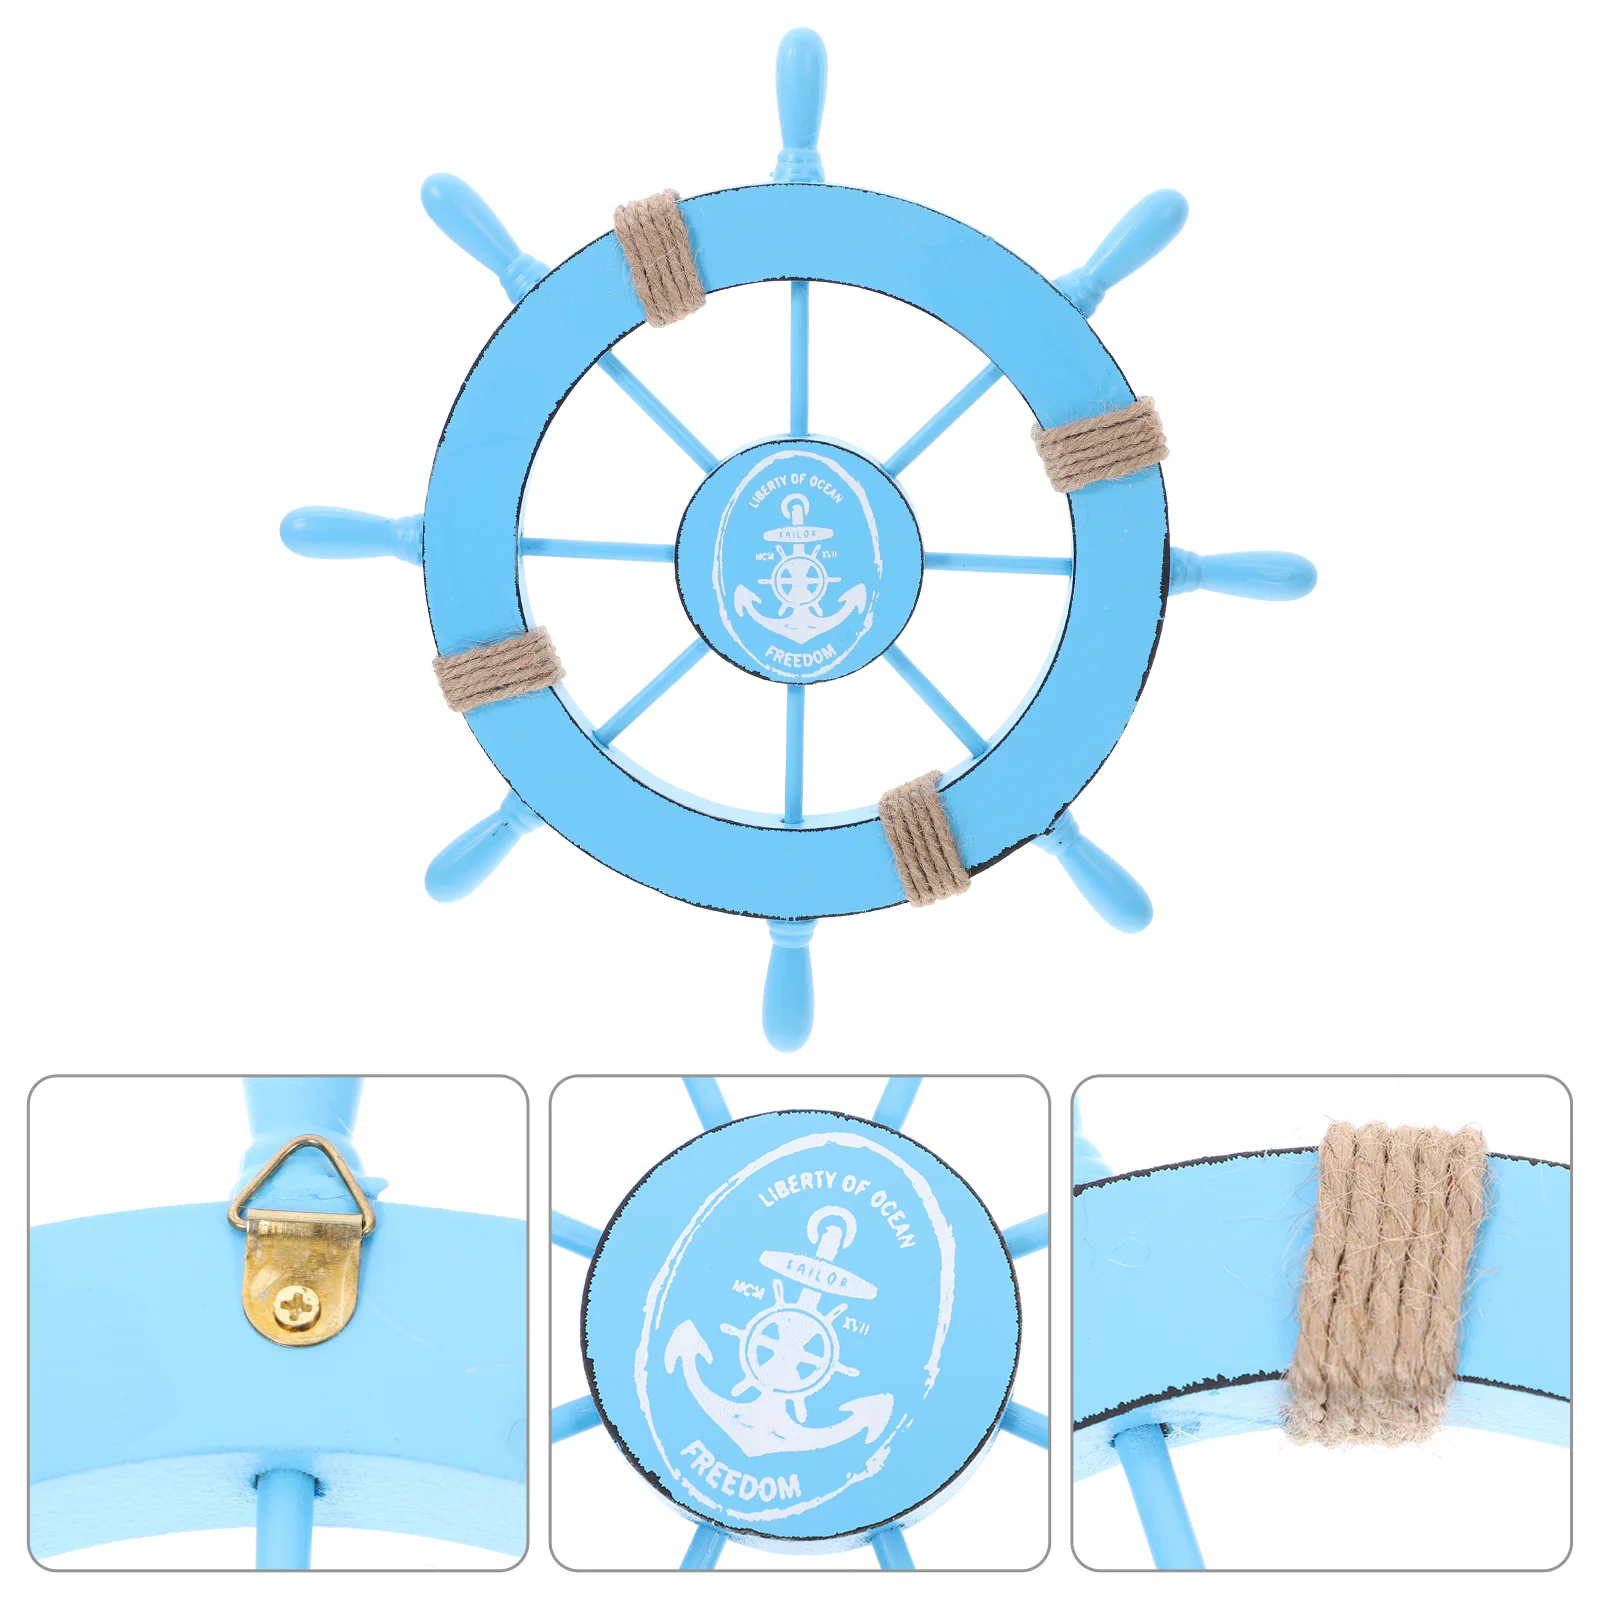 

Wheel Decor Ship Nautical Wall Wooden Steering Beach Boat Bathroom Home Decoration For Decorations Anchor Fishing Net Art Pirate